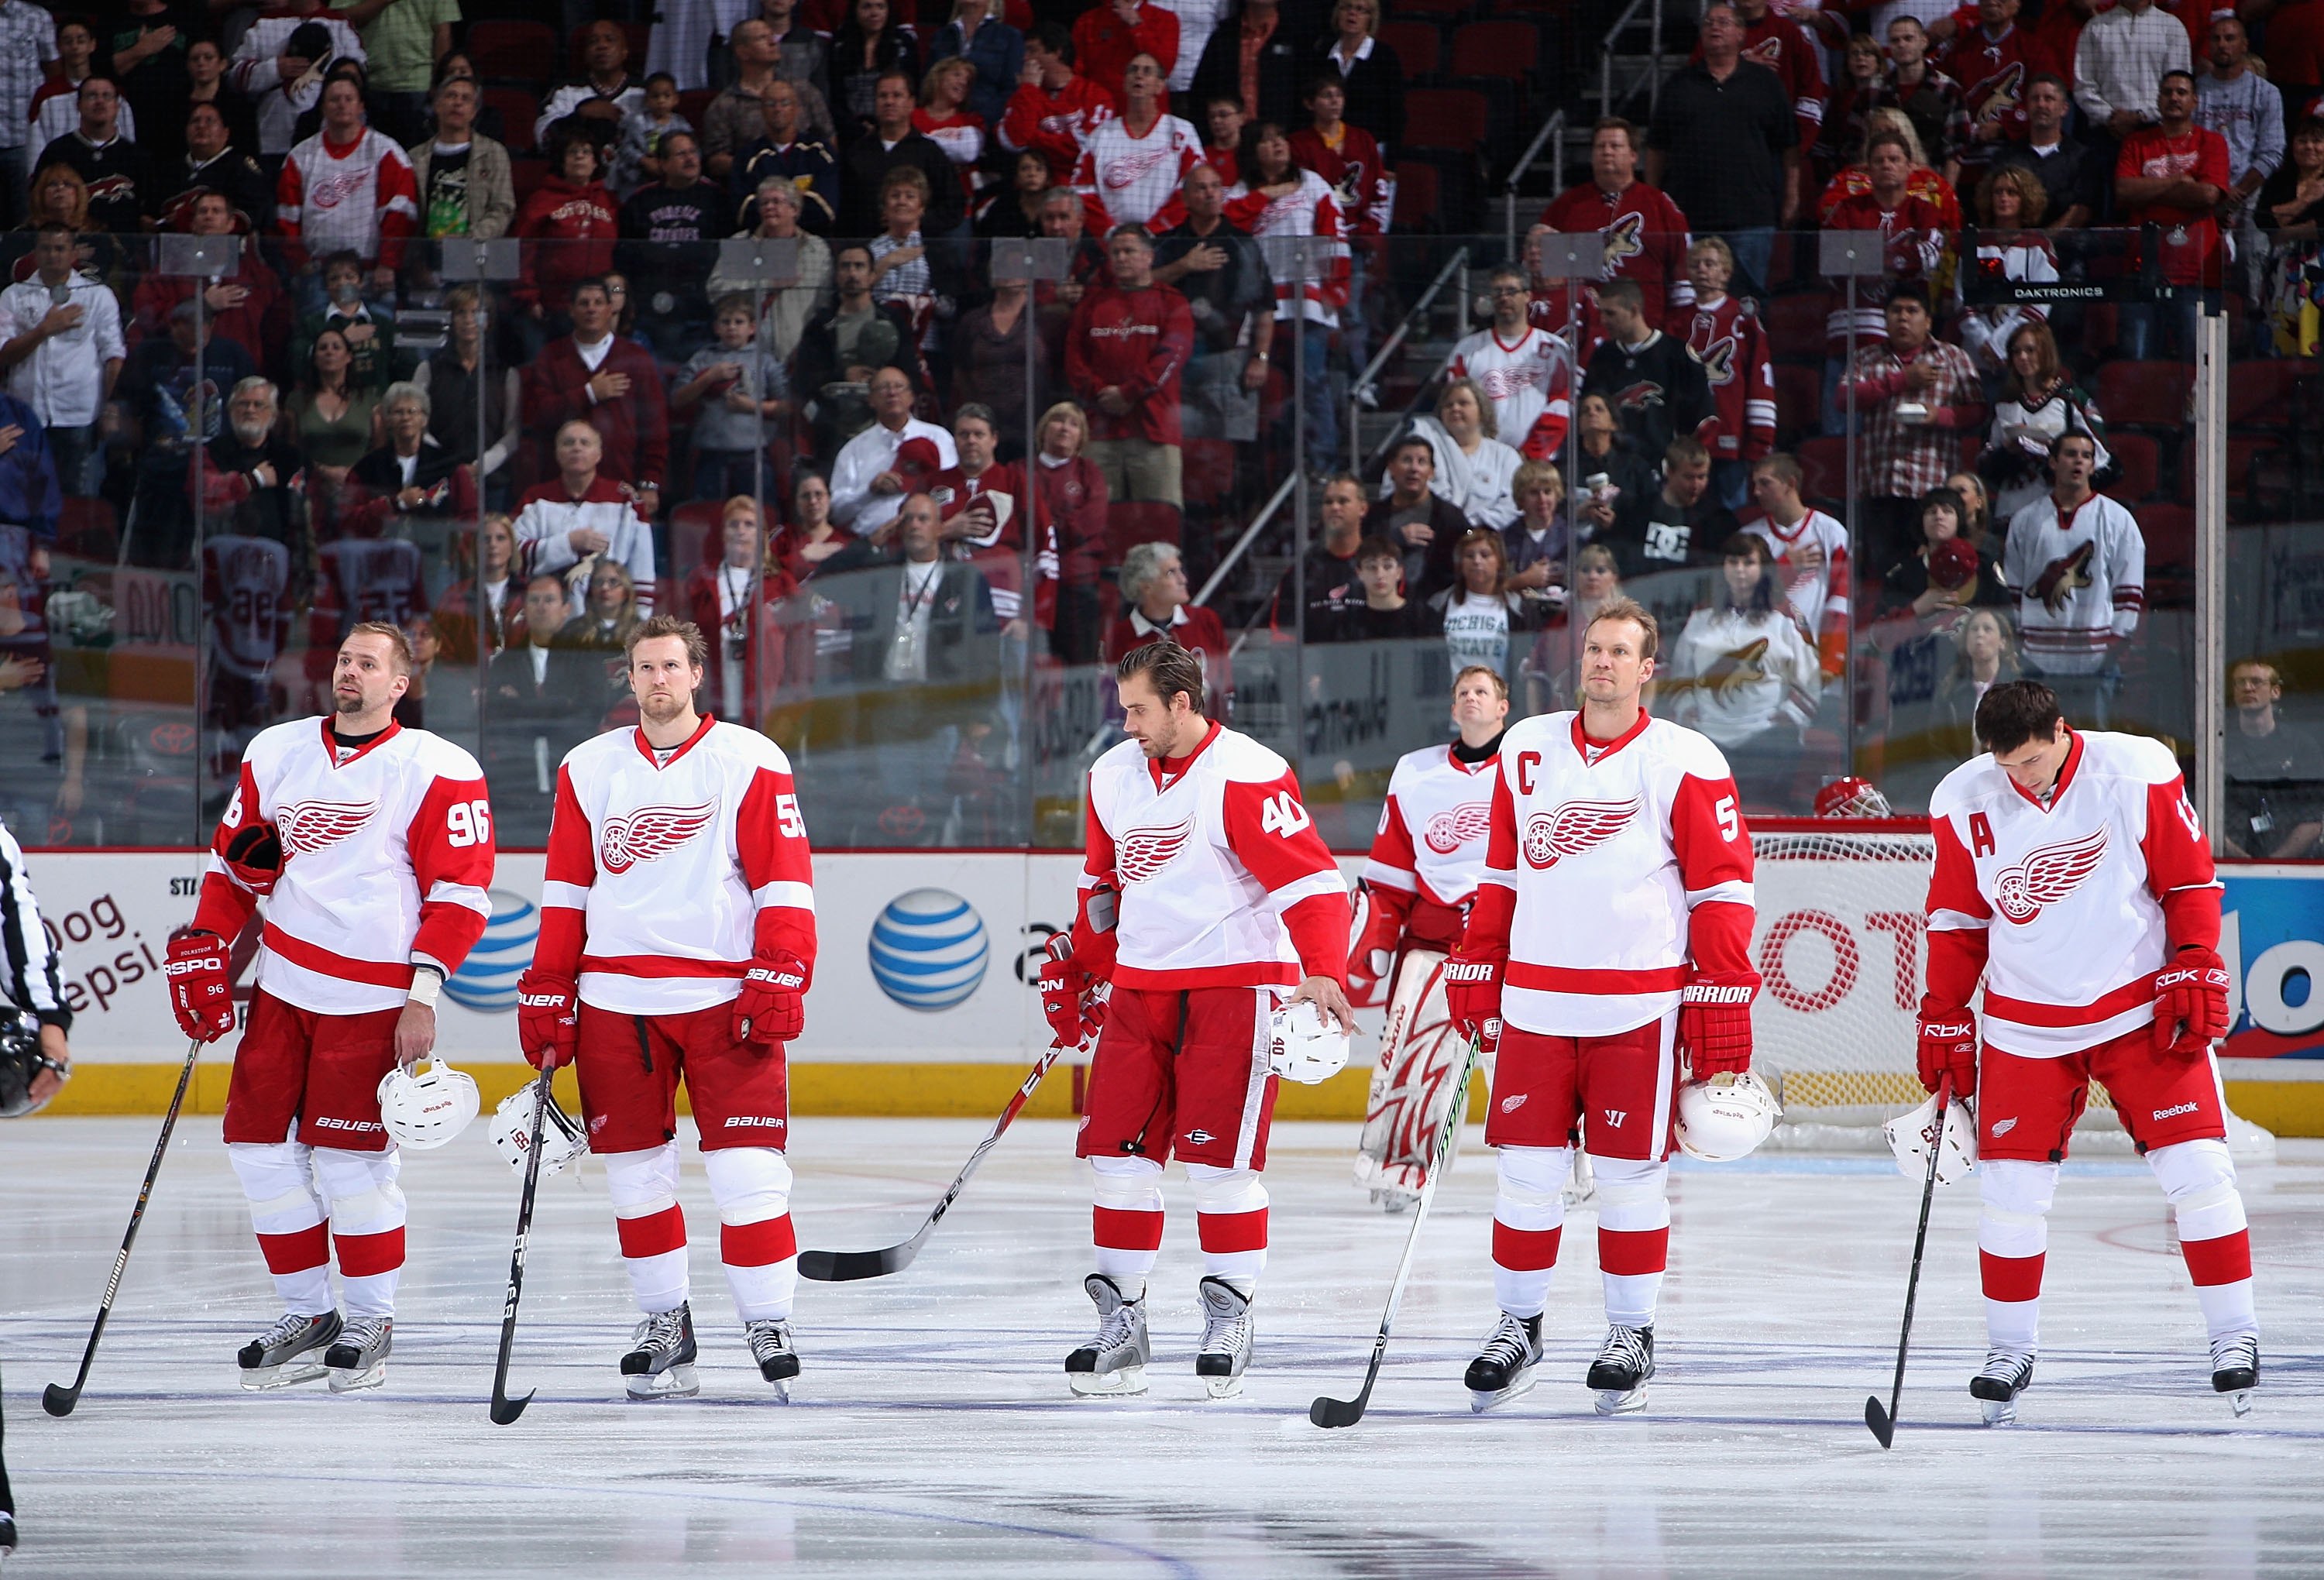 detroit red wings sweater numbers